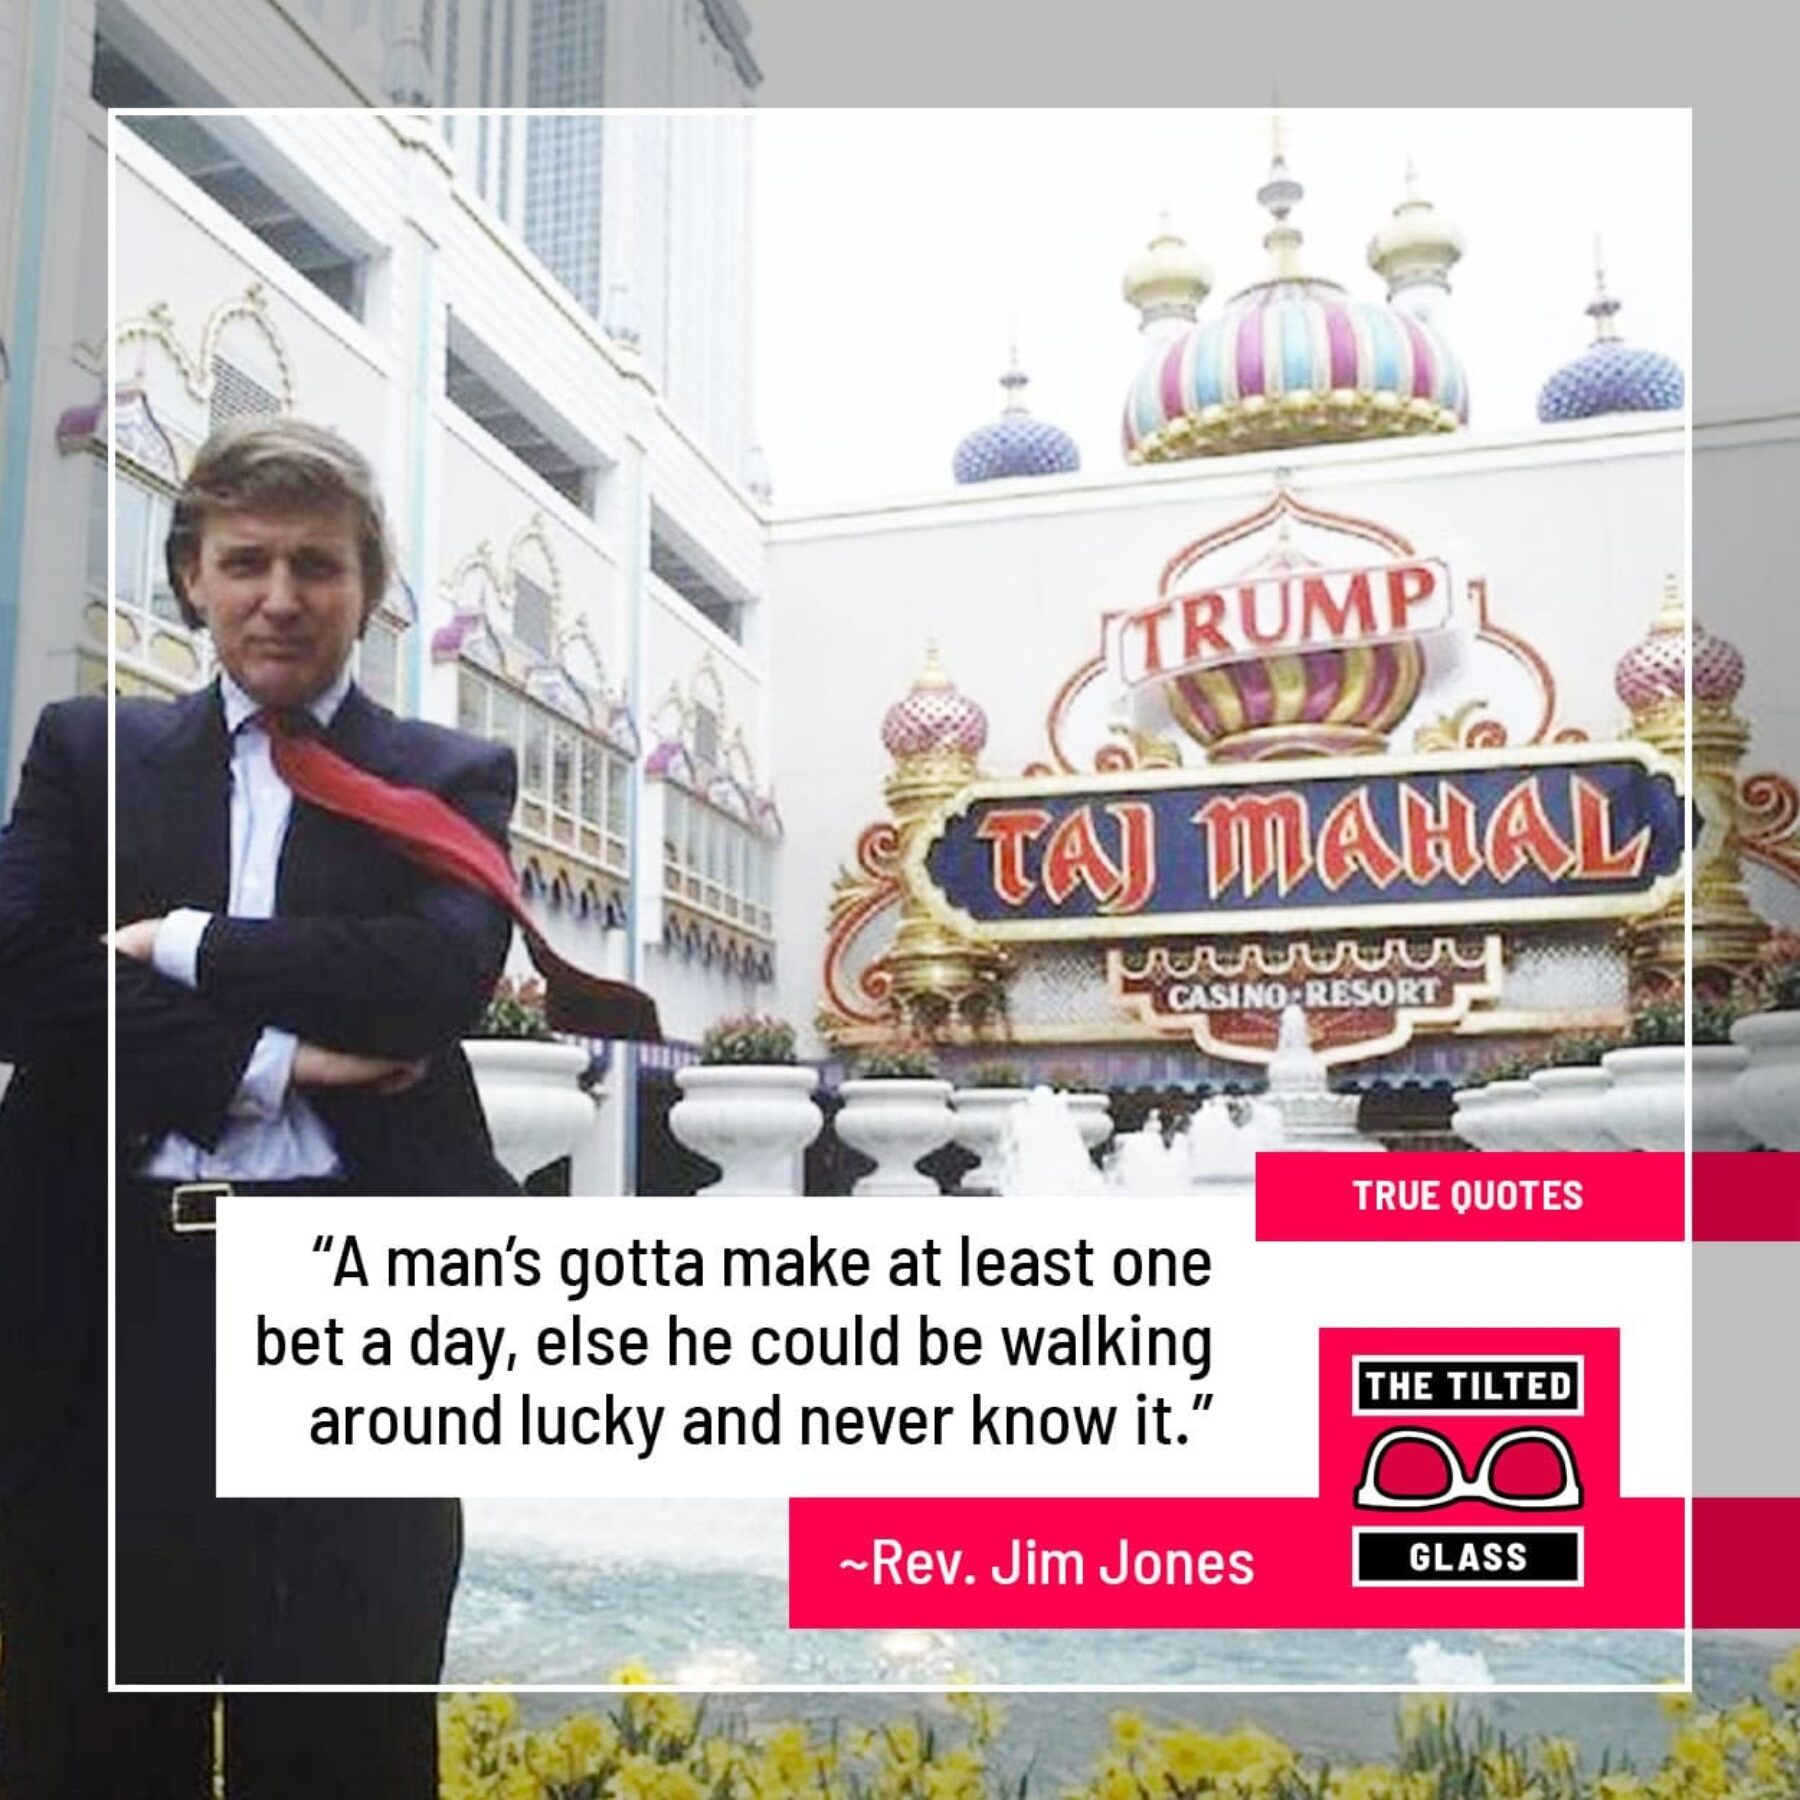 Trump: “A man’s gotta make at least one bet a day, else he could be walking around lucky and never know it.”